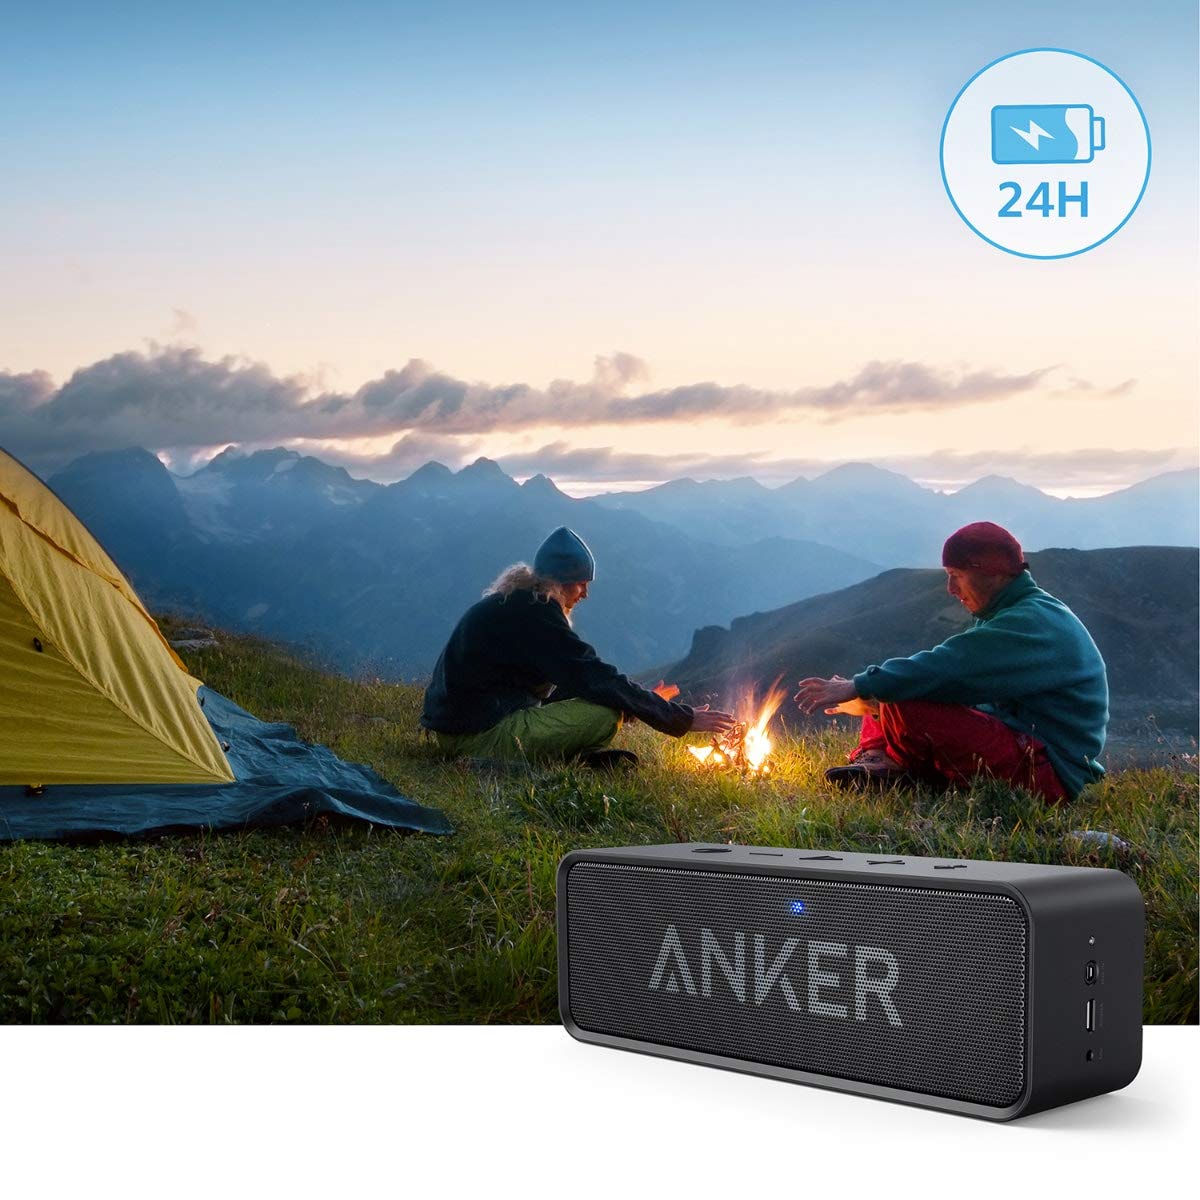 Anker Soundcore Bluetooth Speaker Upgraded Version with Stereo Sound, BassUp Technology, 24H Playtime, Built-in Mic, Portable Wireless Speaker(Renewed)